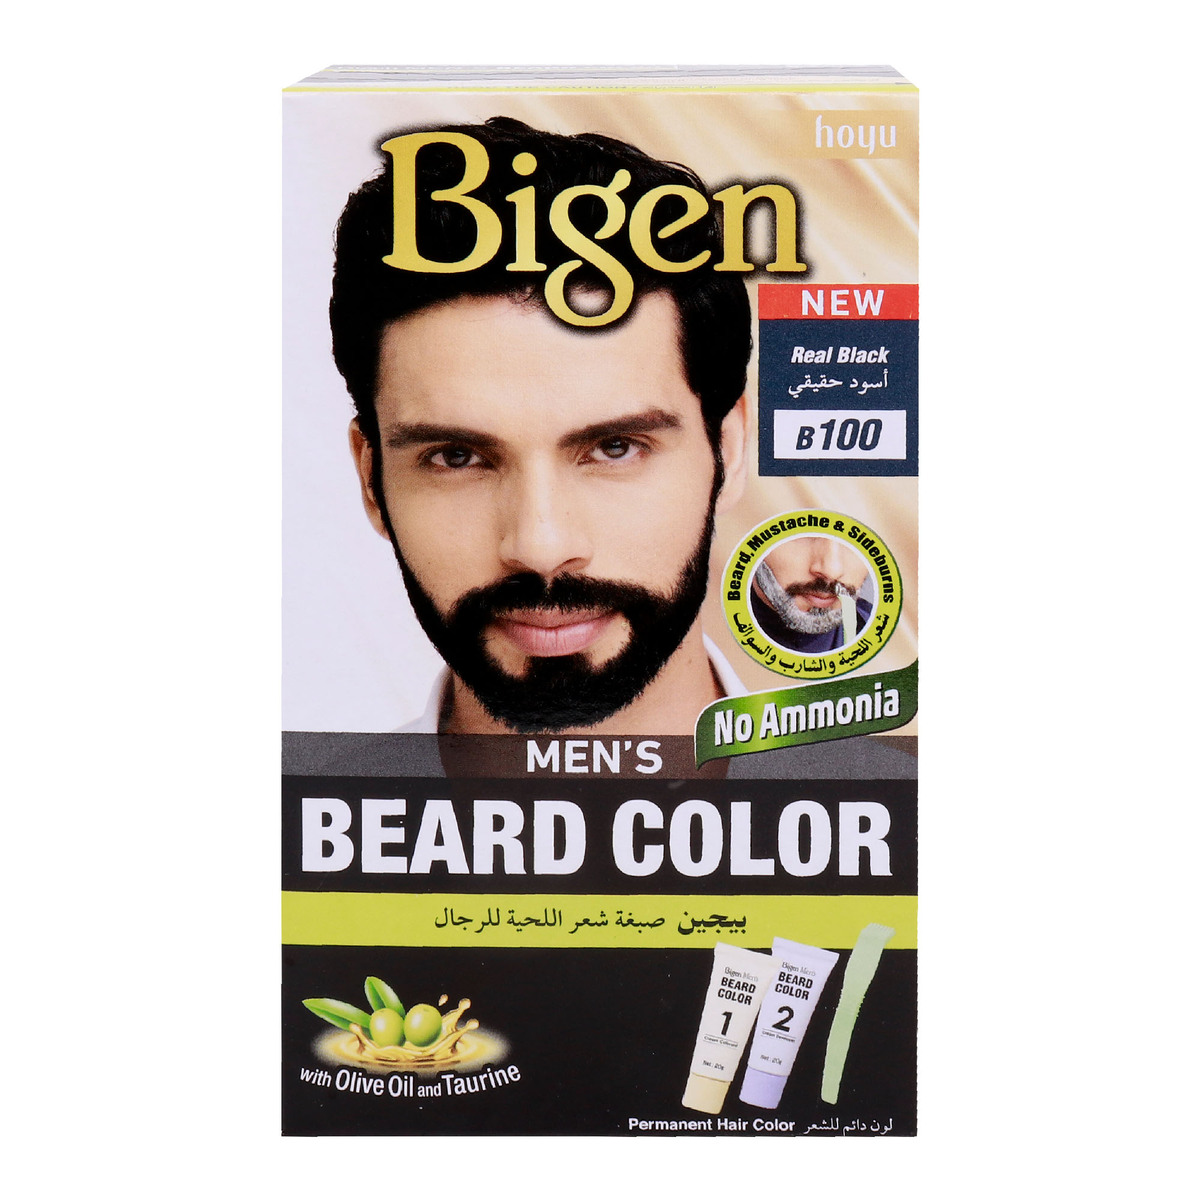 Bigen Men’s Beard Colour with Olive Oil and Taurine, Real Black, 1 pkt